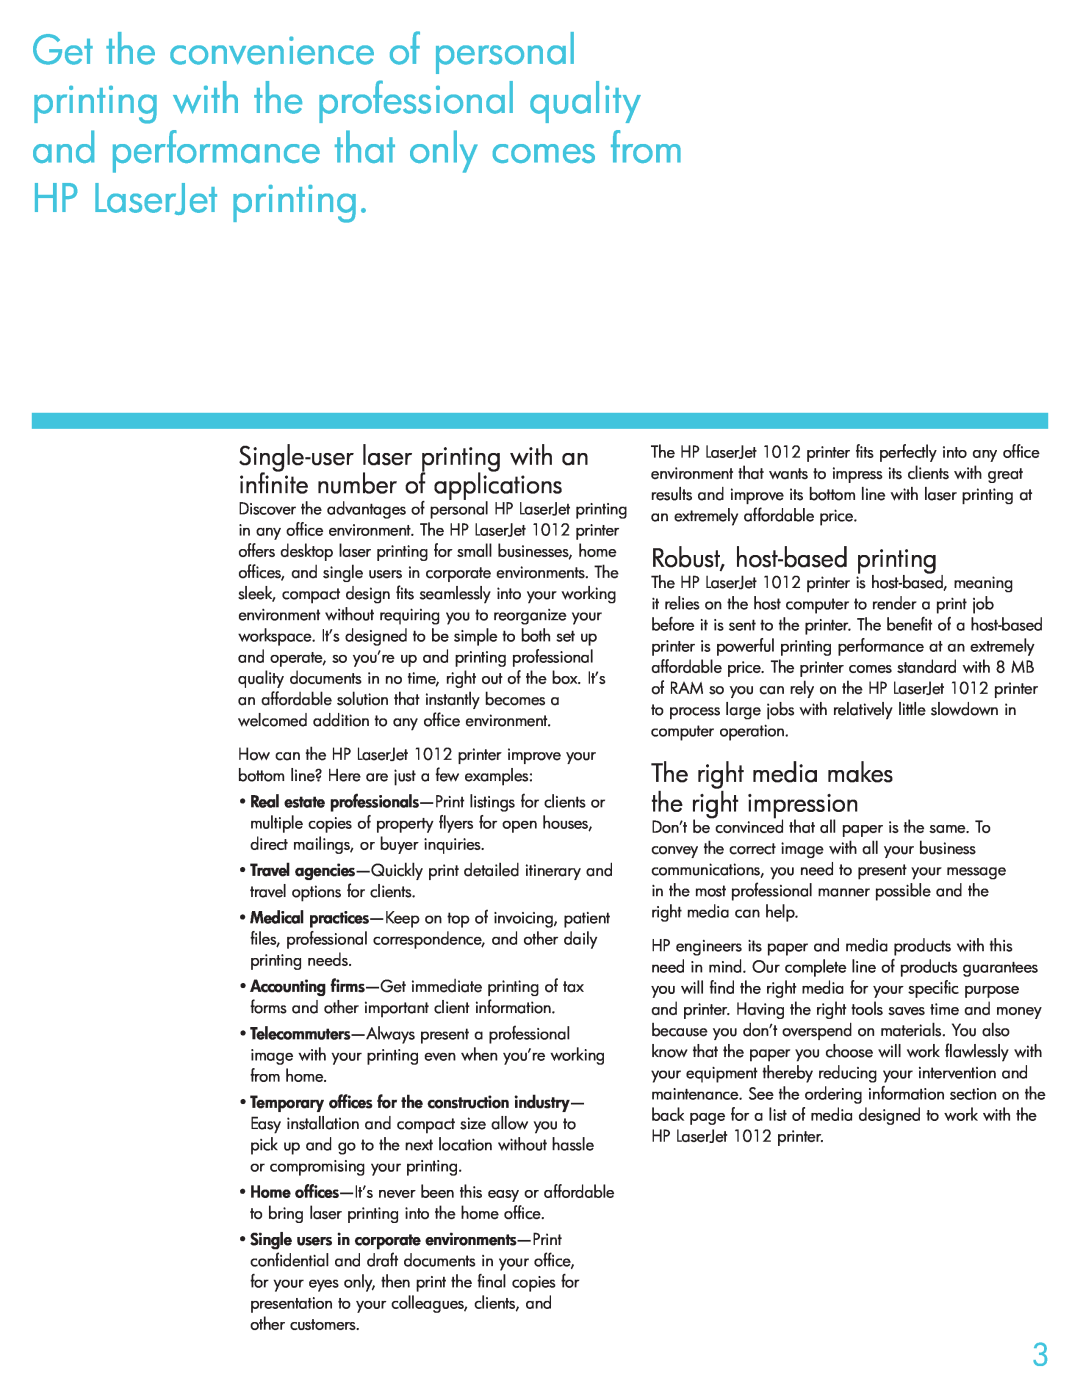 Sharp LaserJet 1012 Robust, host-based printing, Single-user laser printing with an infinite number of applications 